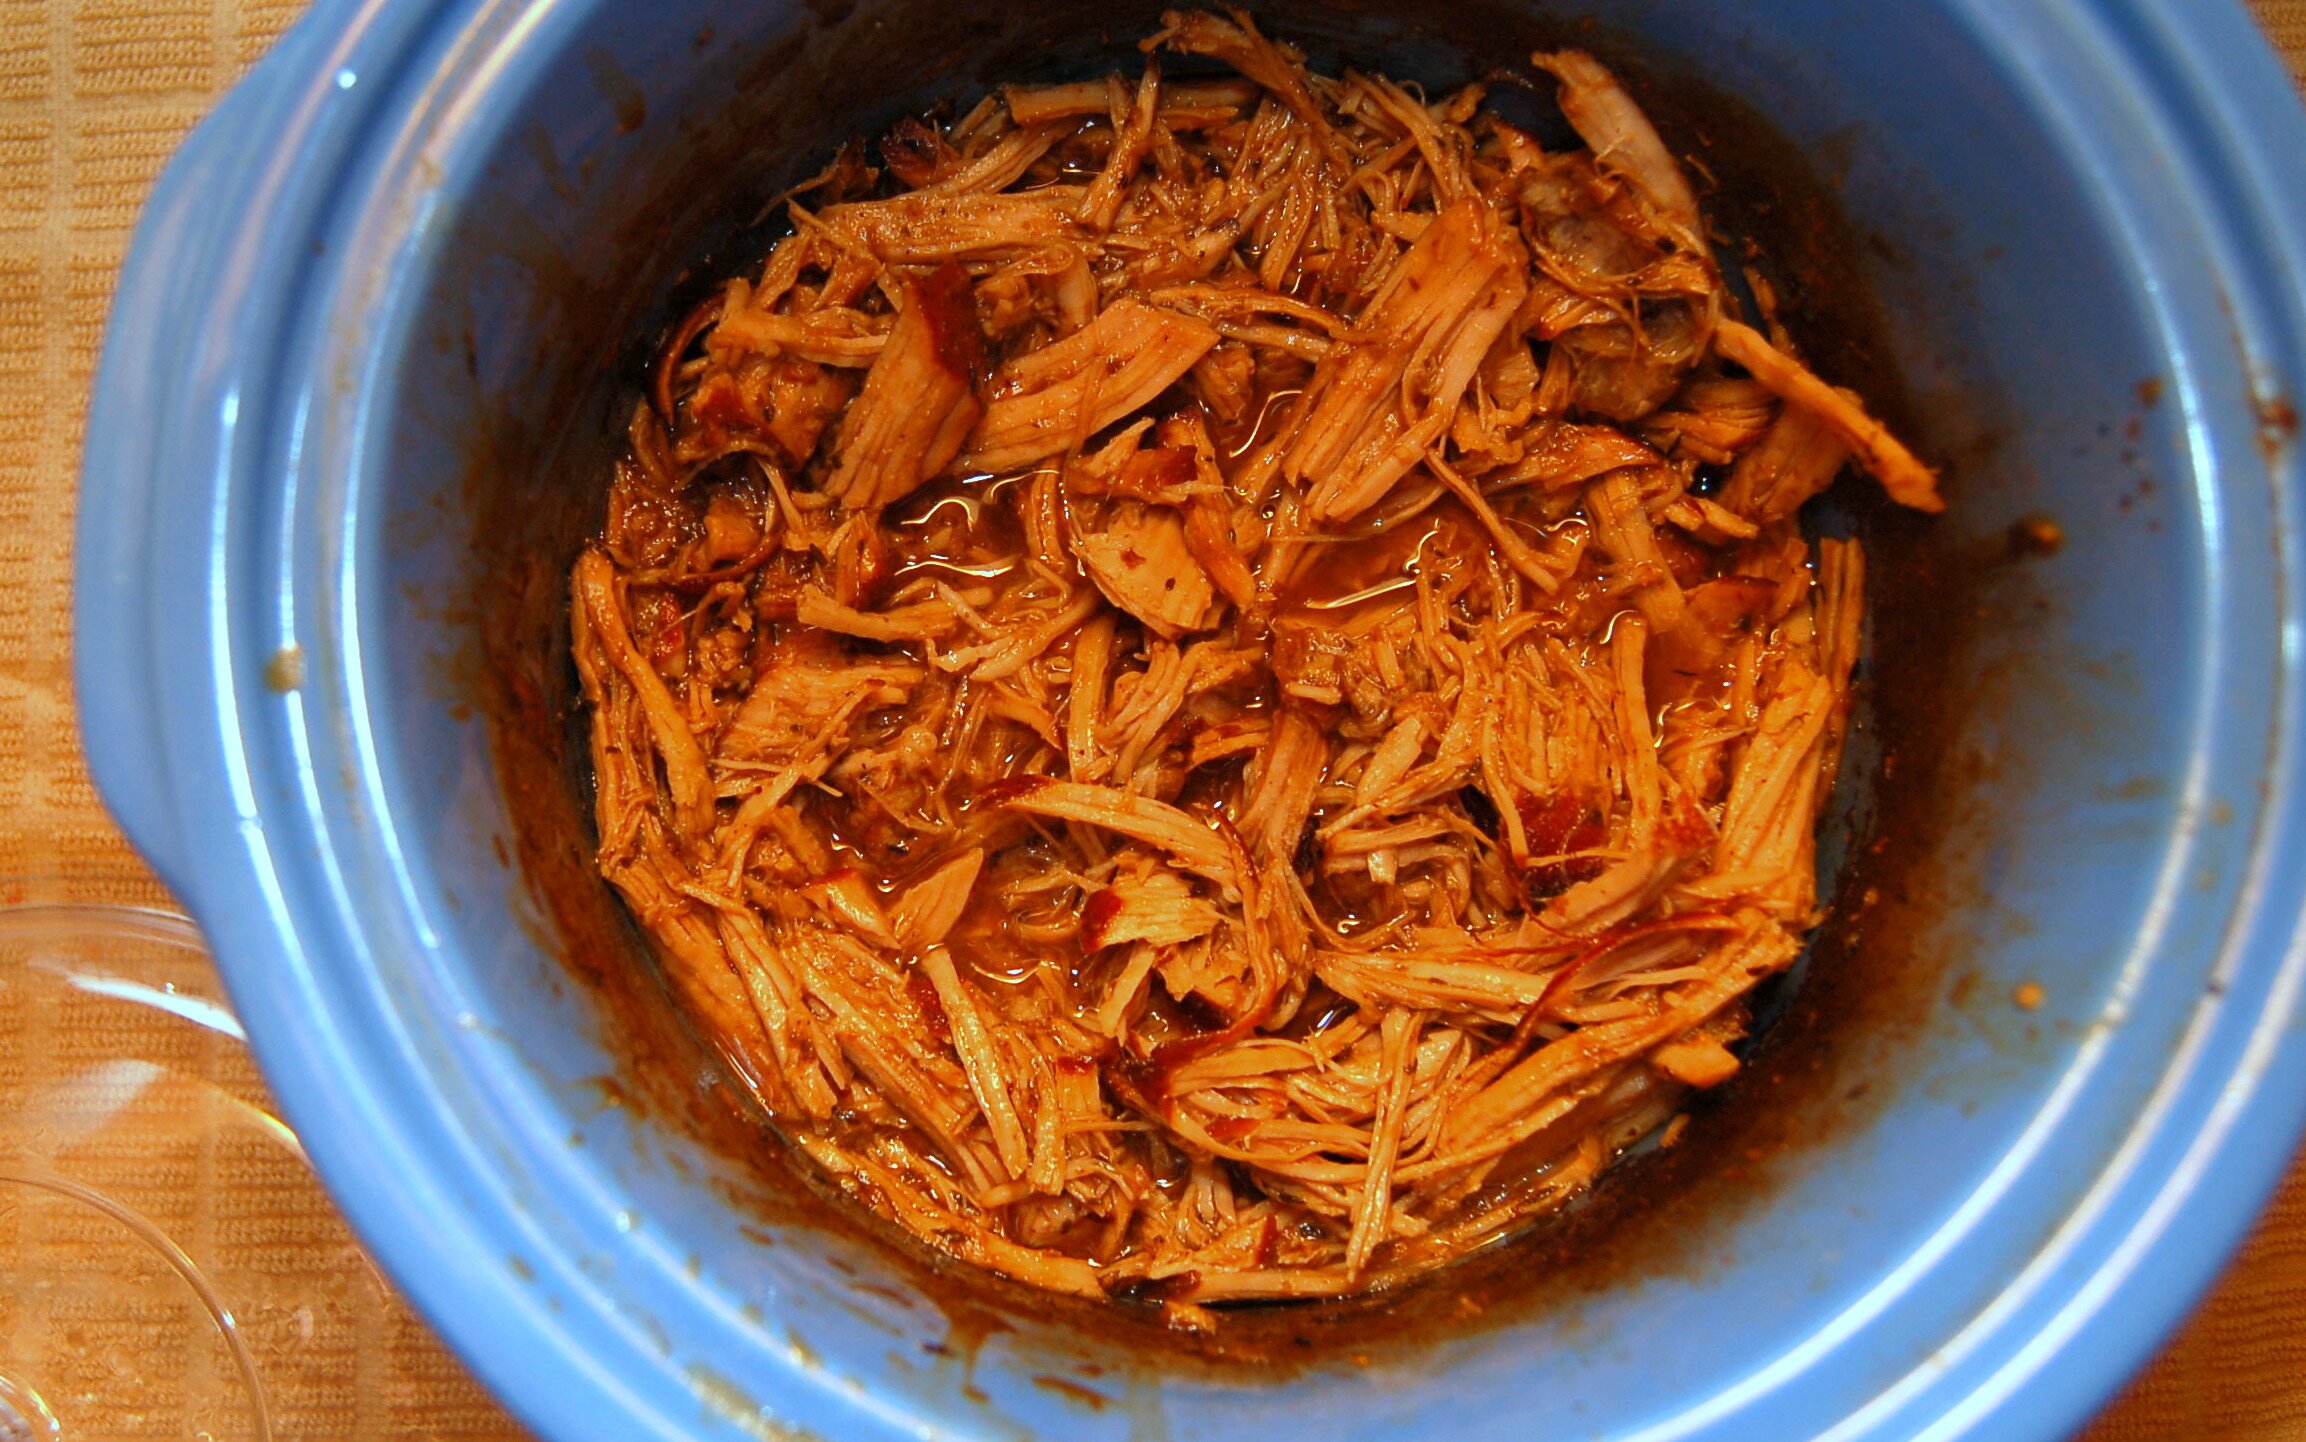 Pulled Pork Sandwiches made in the Crock Pot! | Easy on the Cook